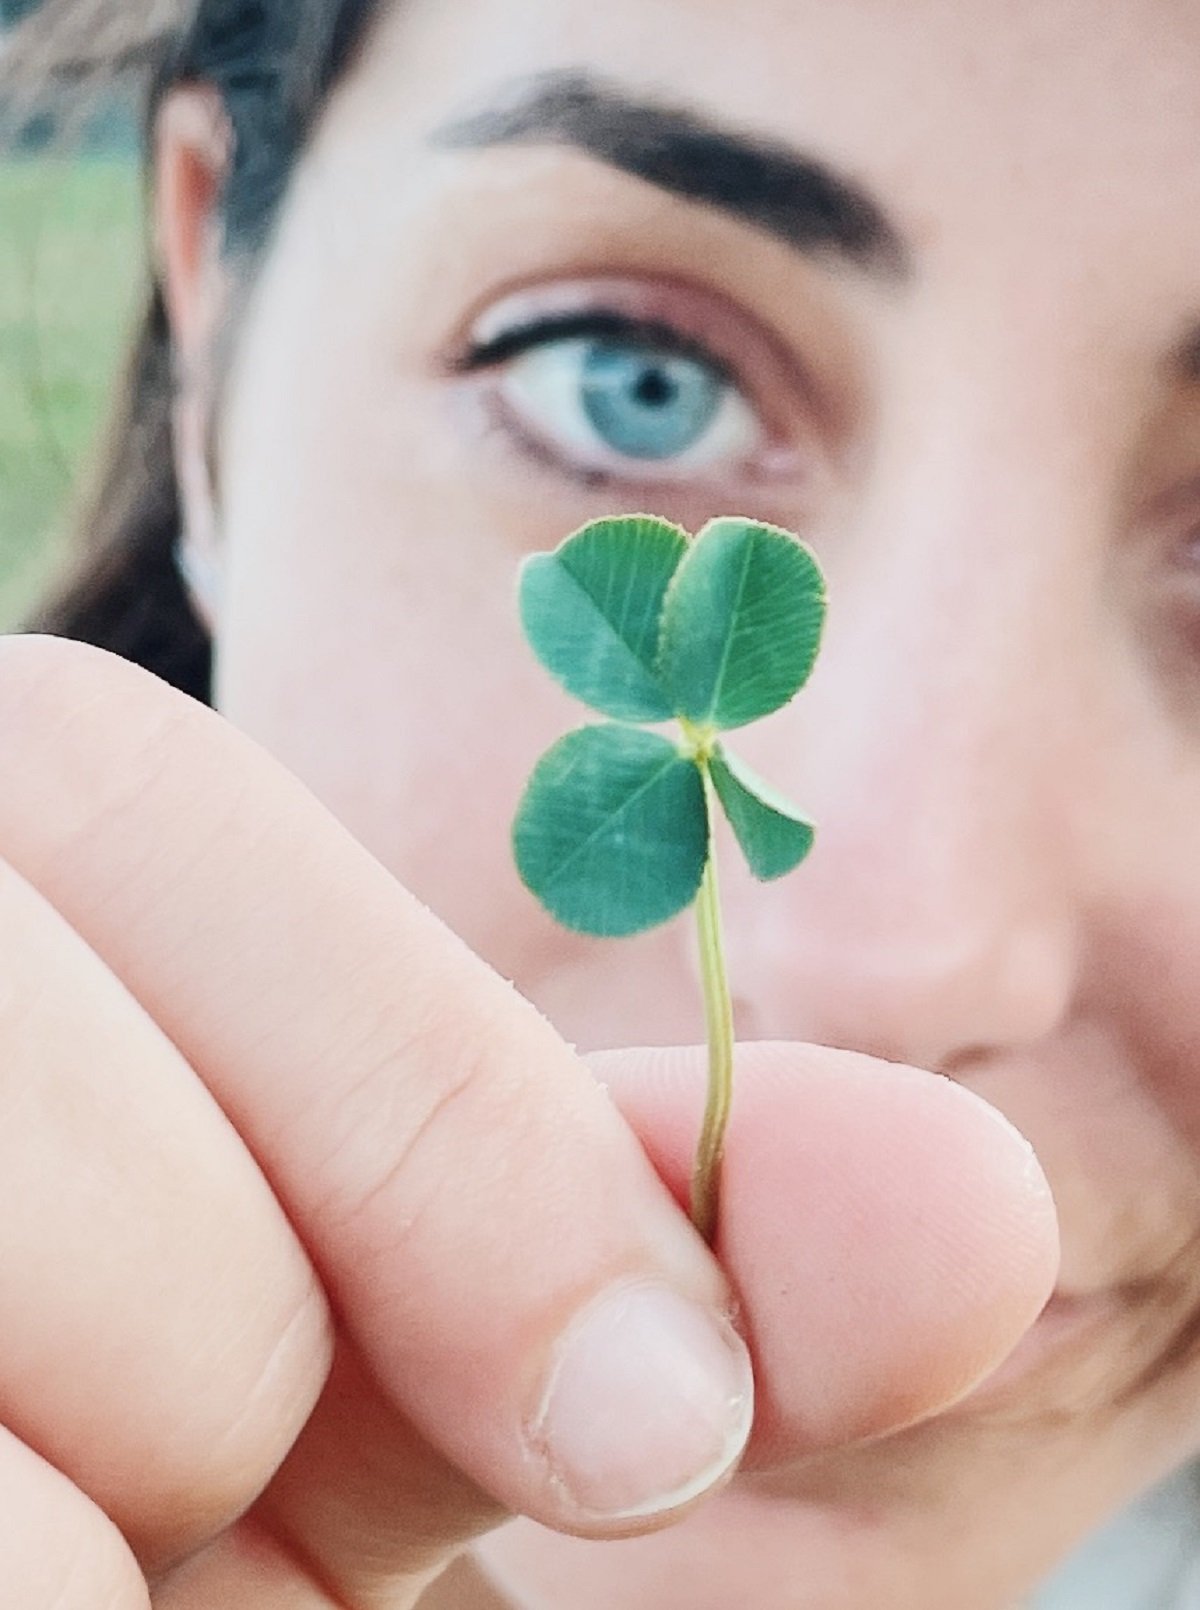 Woman in Disbelief After Finding Incredibly Rare Four-Leaf Clover: 'Luck